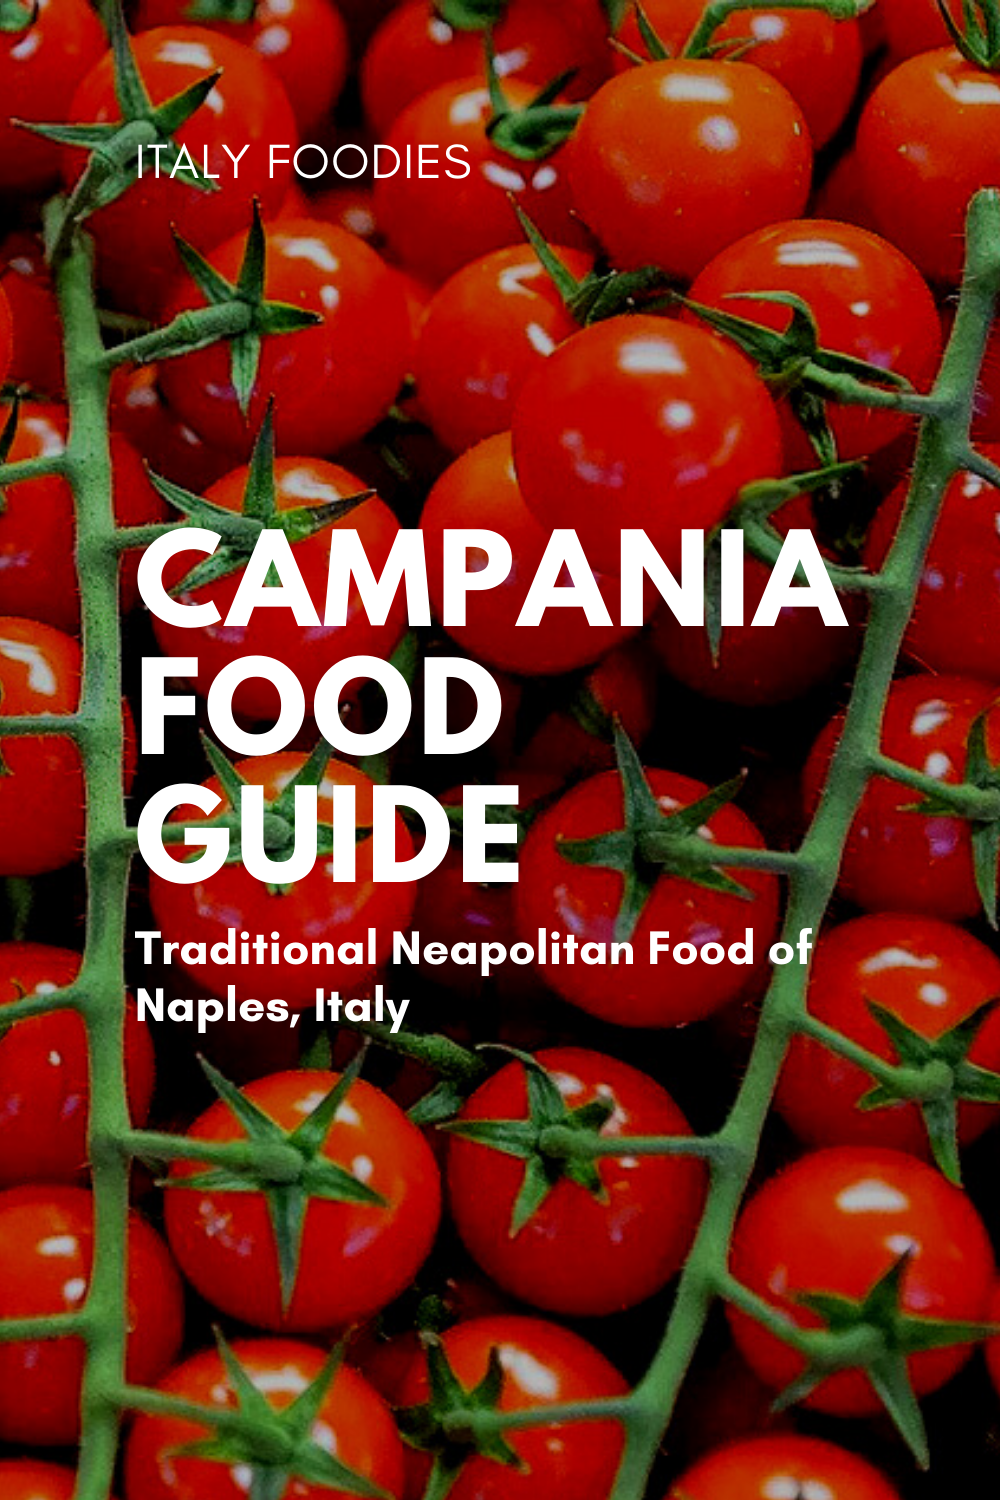 Naples, Italy Food Guide: 25 Campania Food Dishes and What to Eat in Naples